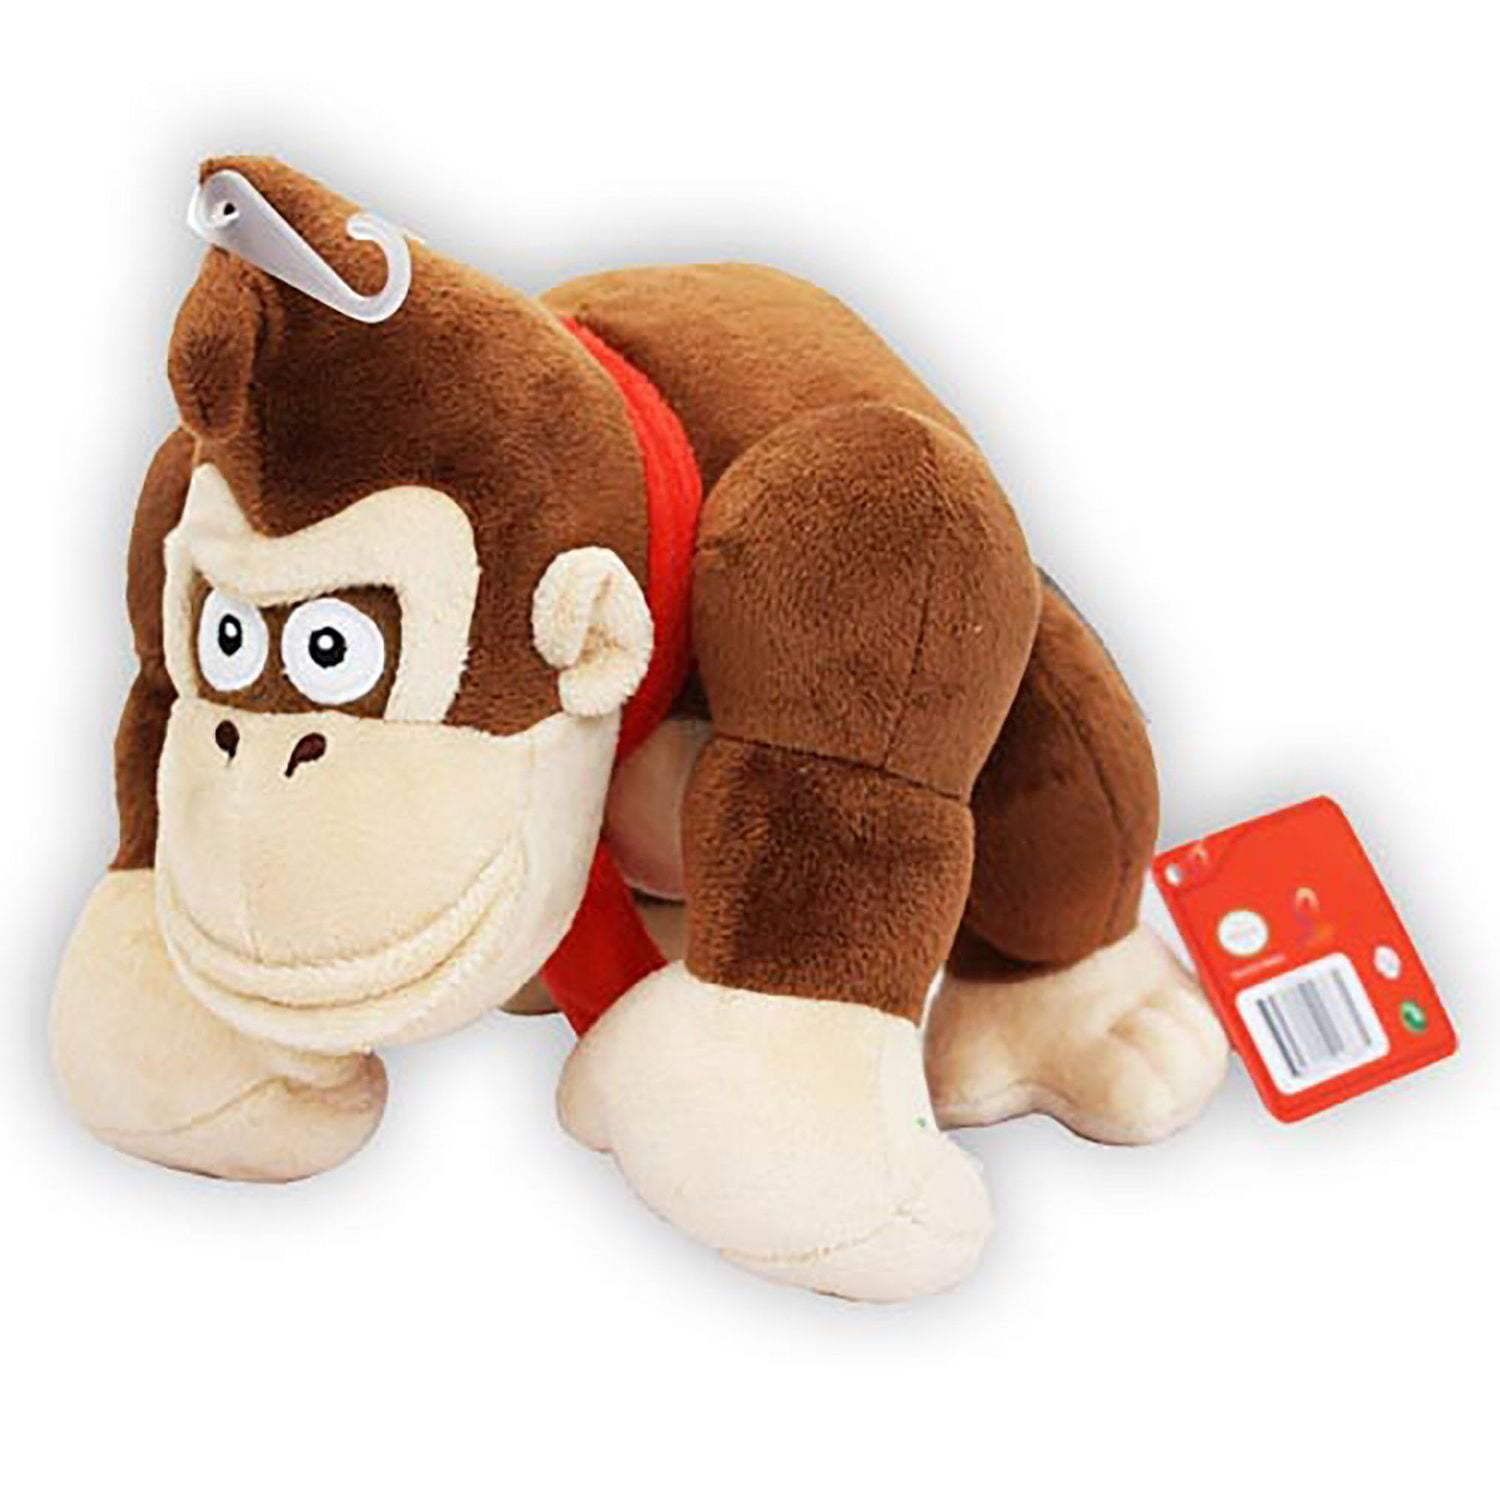 Super Mario Brothers Donkey Kong Plush Figure Toy Stuffed Toy Xmas Gift 9 In 